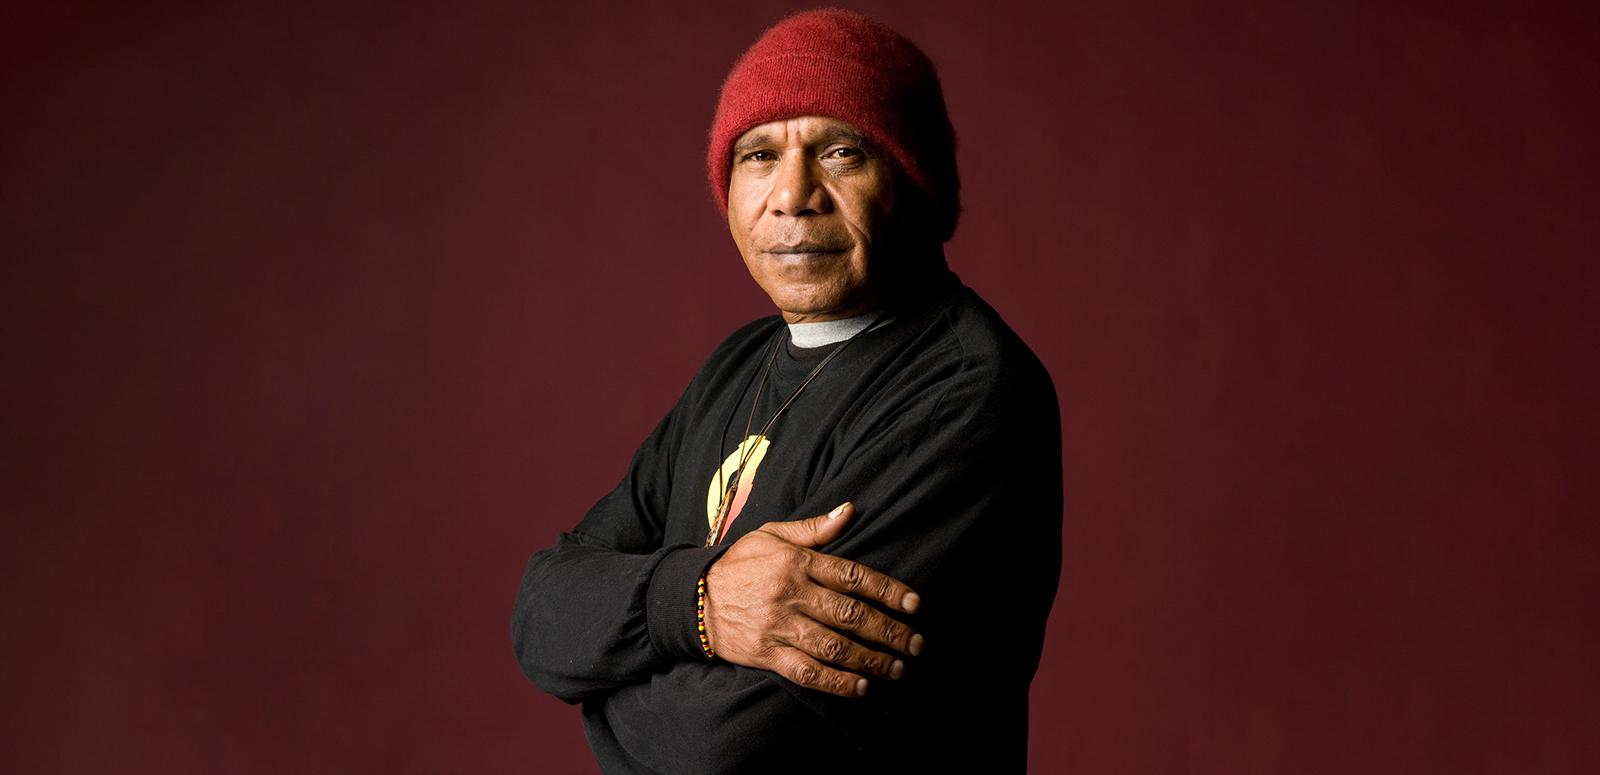 Archie Roach looks at the camera with his arms folded.